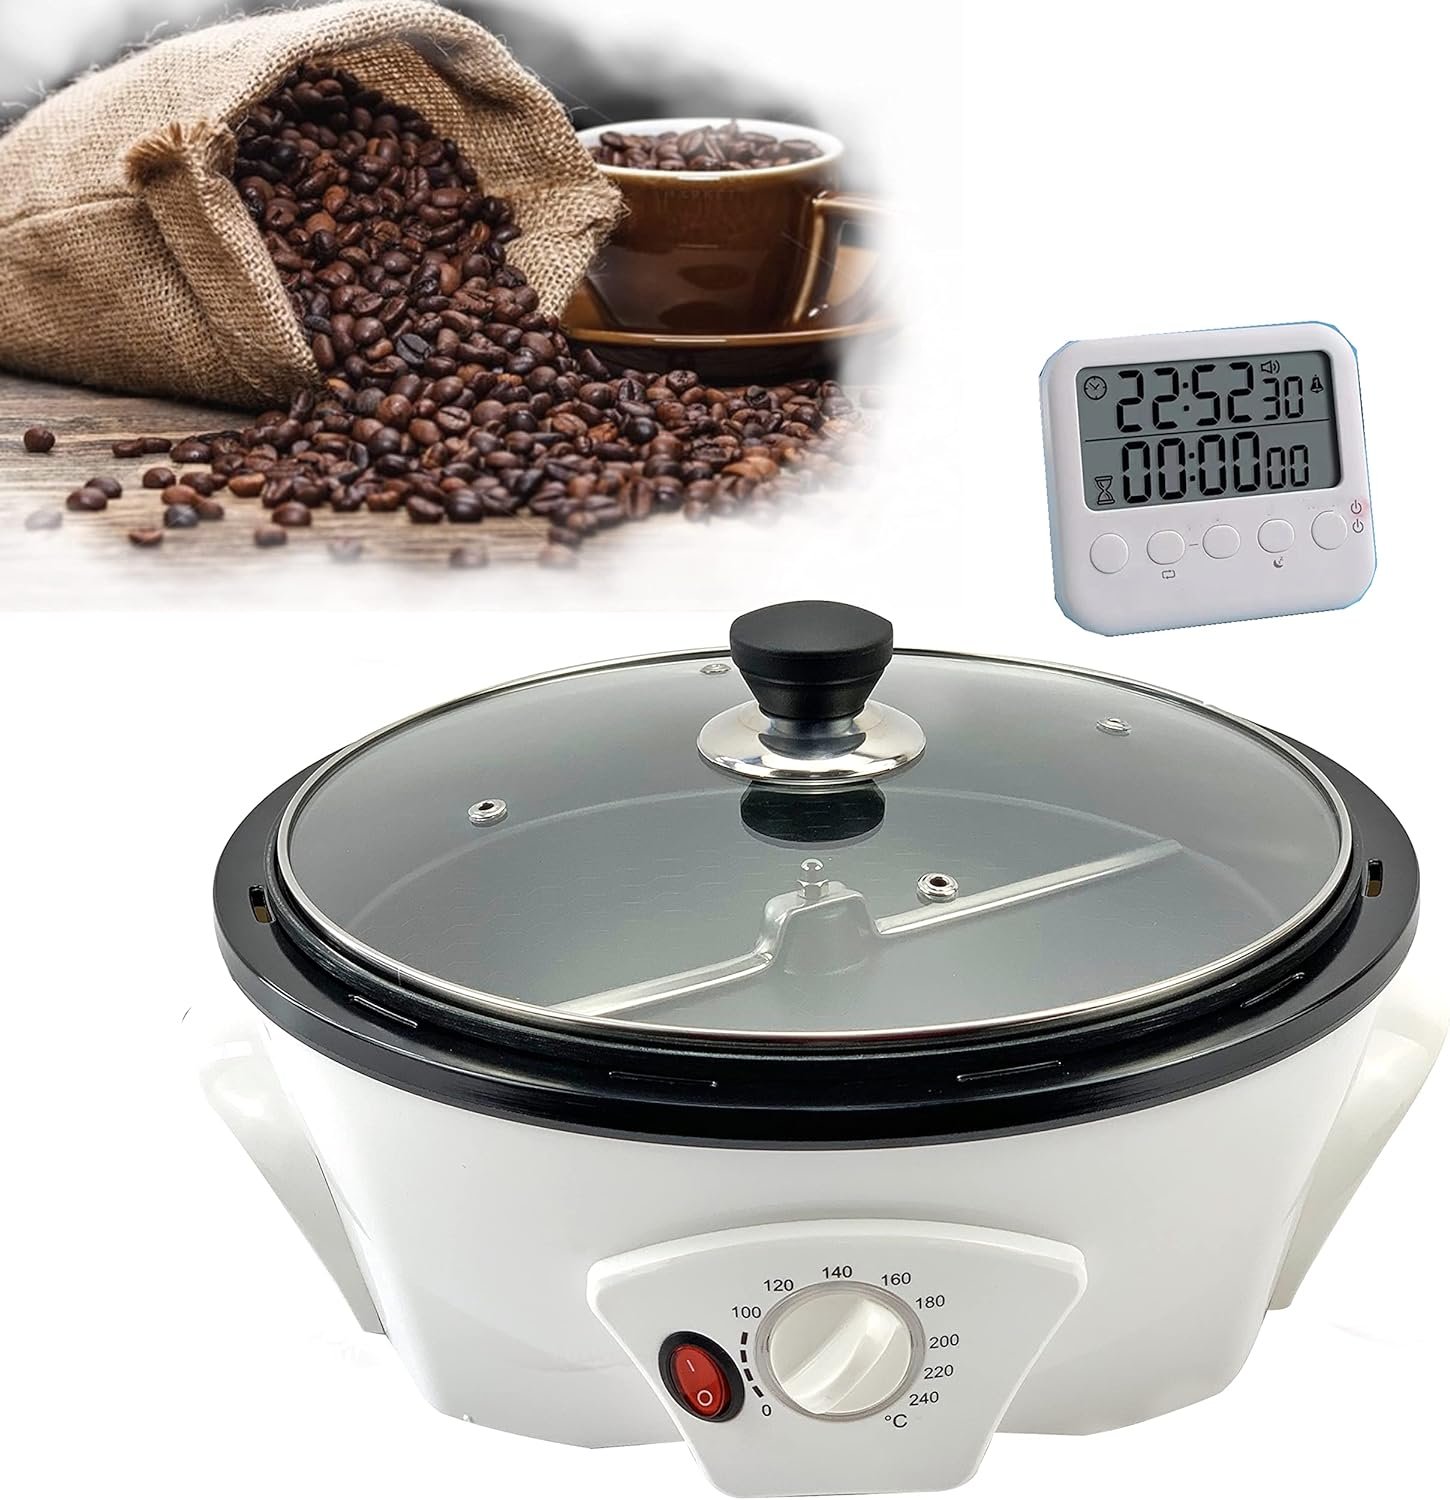 GIVEROO 500g Coffee Bean Roaster Household Coffee Roasters Machine with Timer Electric Coffee Beans Roaster 0-240℃ Non-Stick for Cafe Shop Home Use. 110V